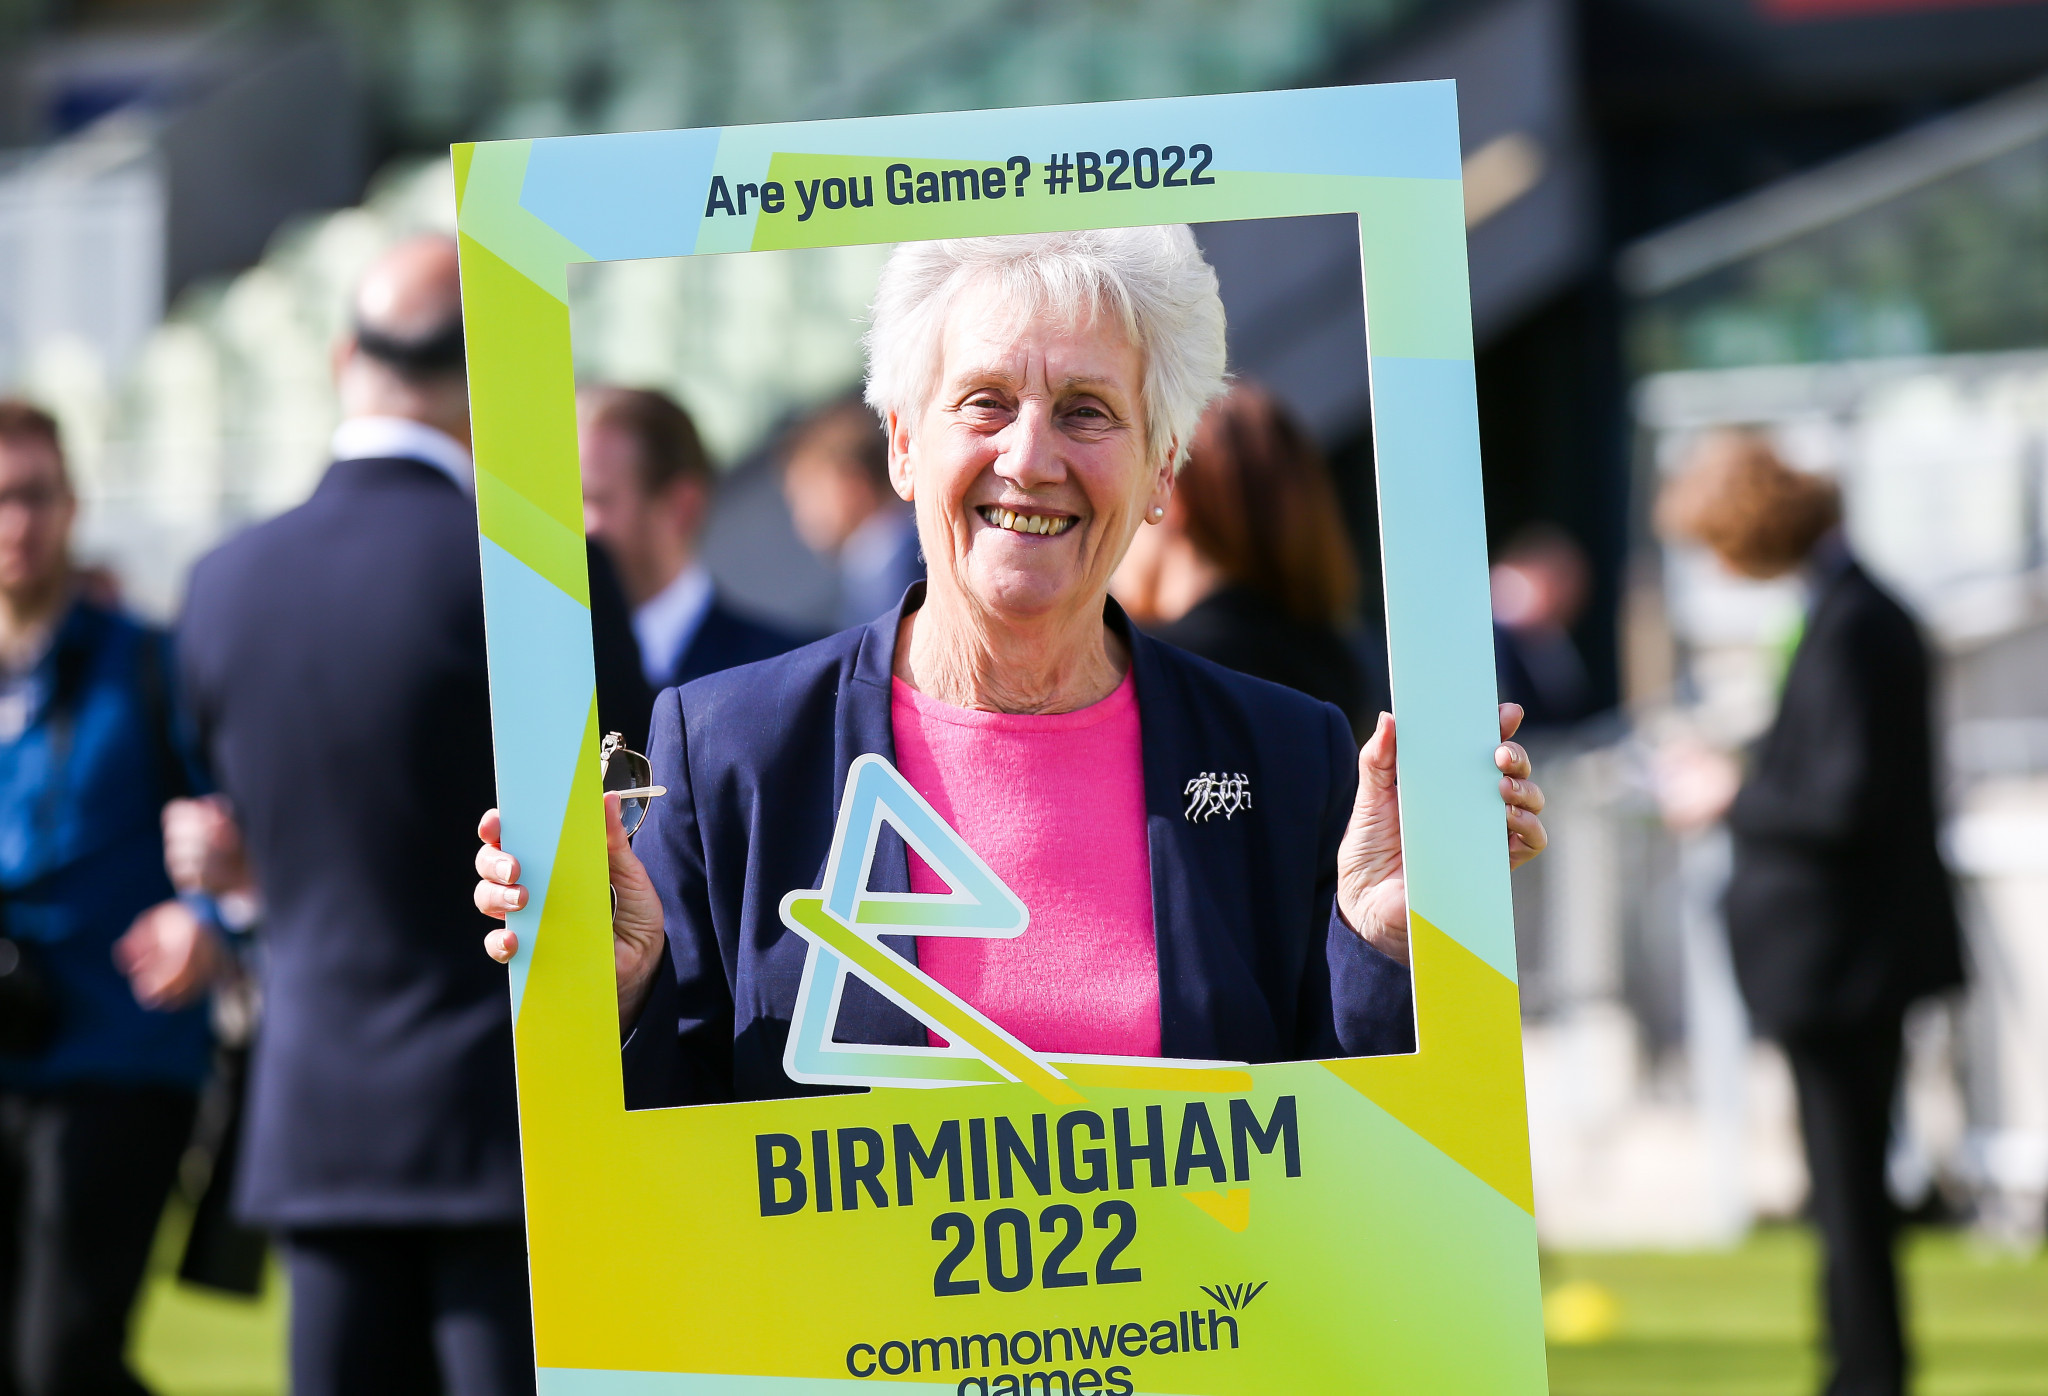 Dame Louise Martin will be replaced on the Birmingham 2022 Commonwealth Games Board by Sandra Osborne after it was criticised for a lack of diversity ©Getty Images